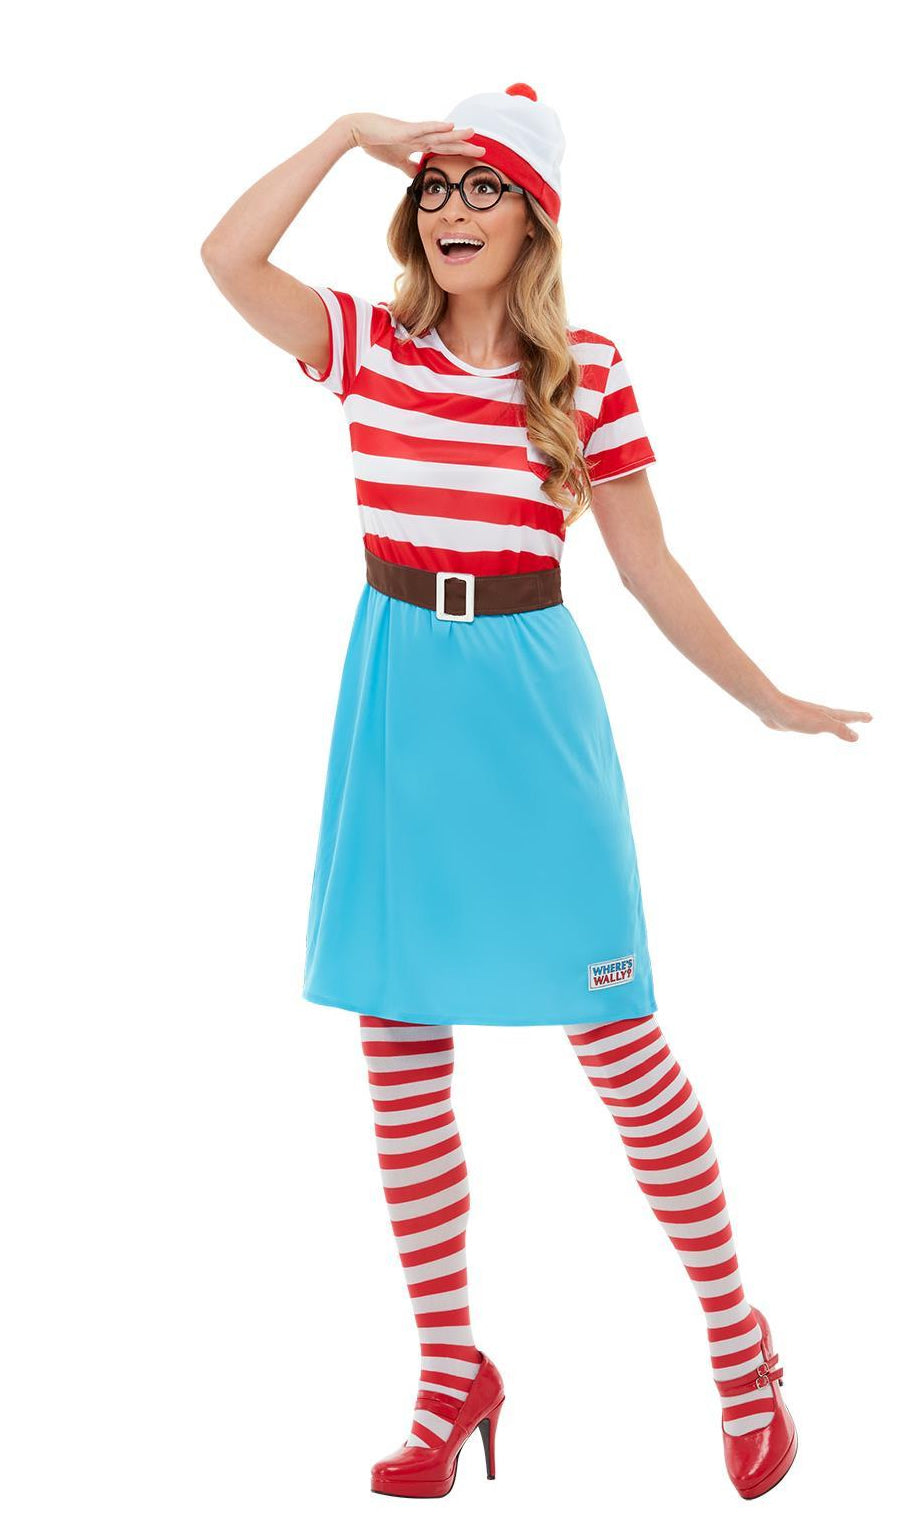 Wenda from Where is Wally dress with hat and glasses